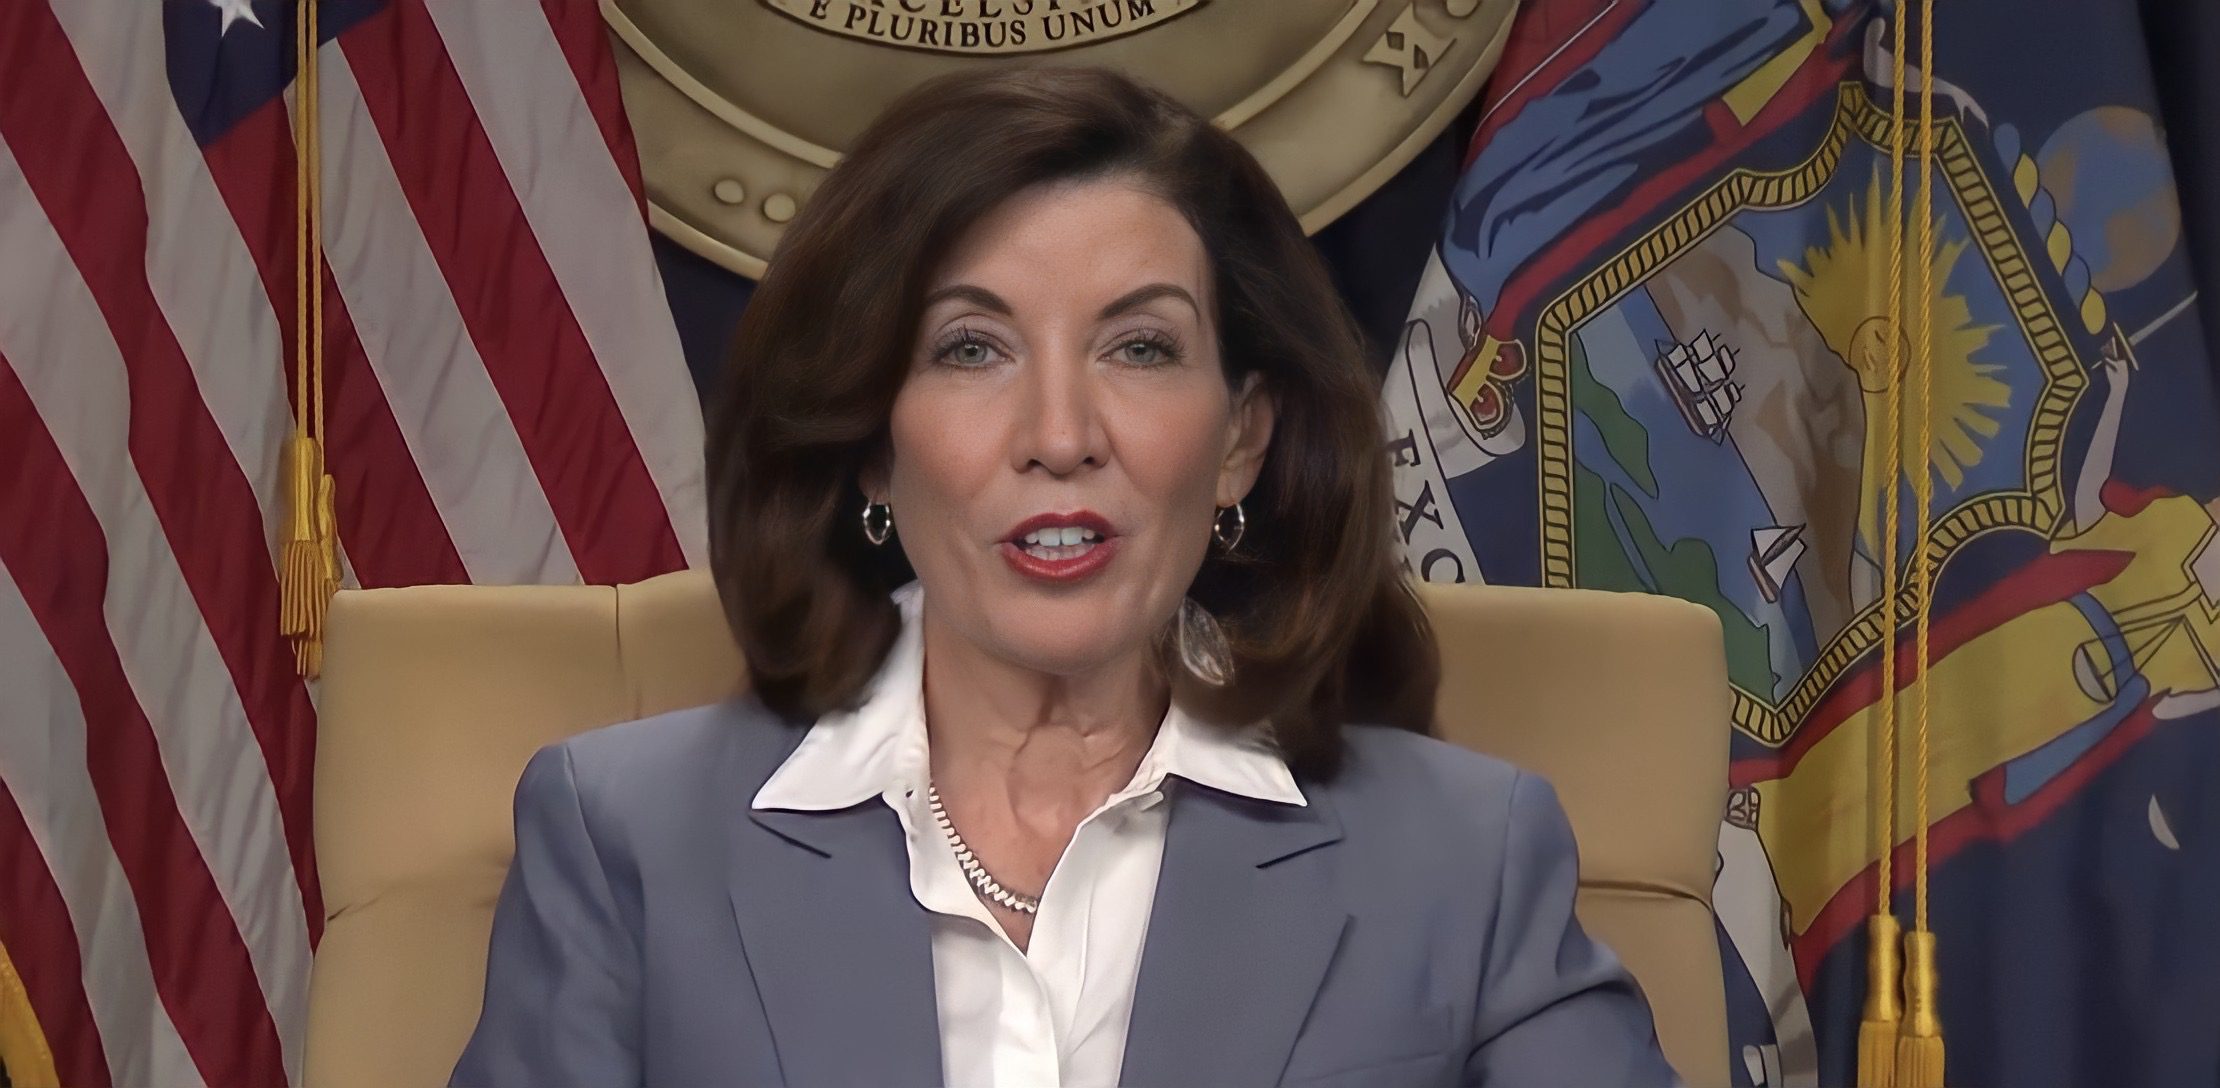 Governor Kathy Hochul Announces  Million to Protect Abortion Providers in New York if Roe Overturned